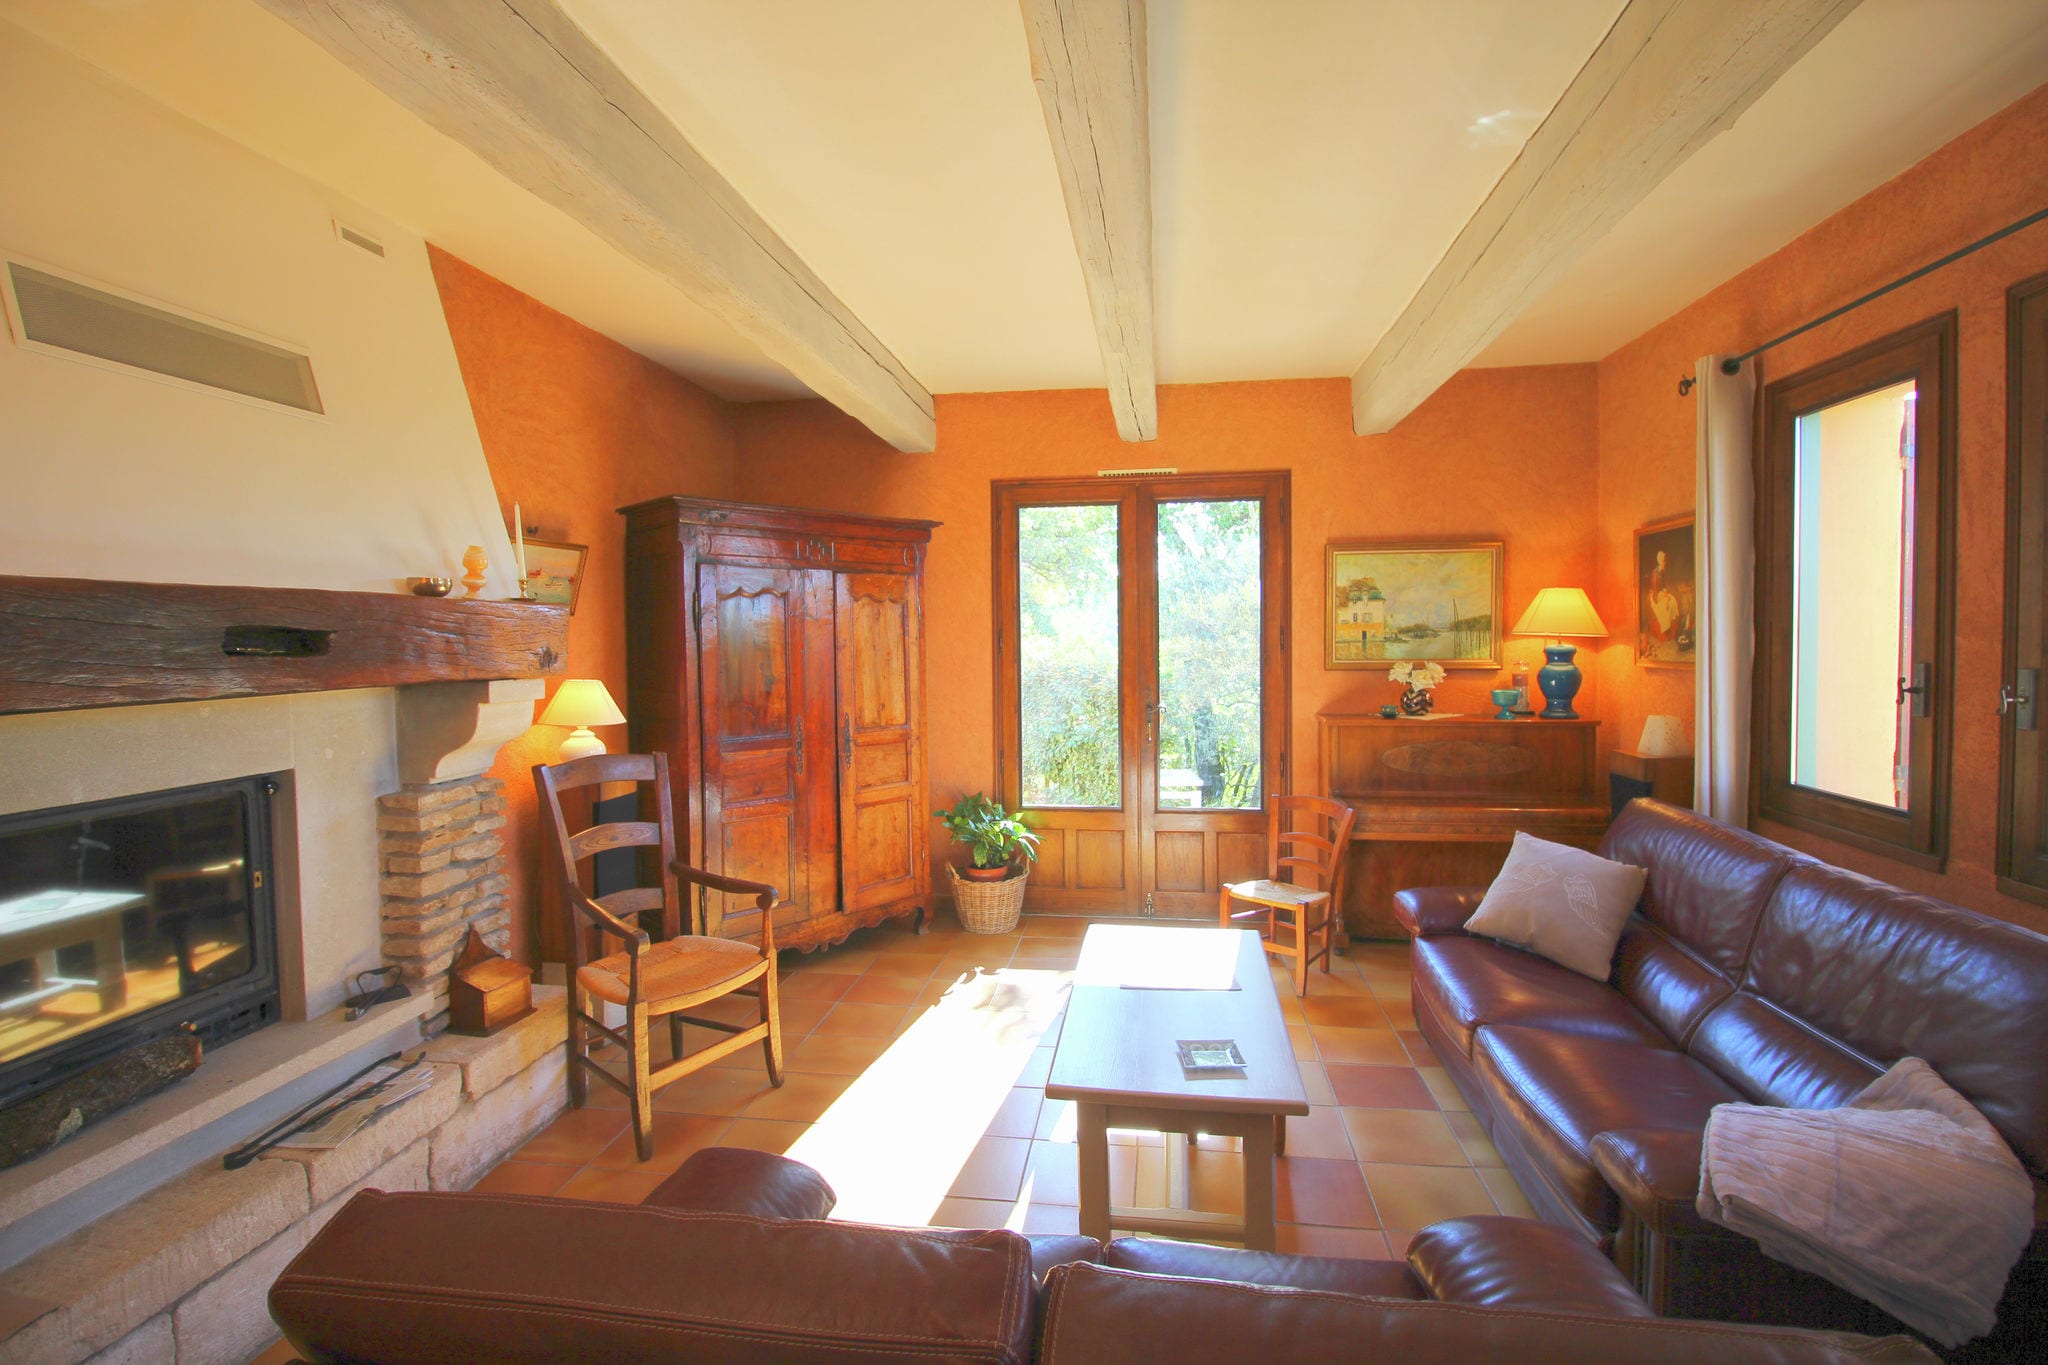 Detached holiday home with private pool walking distance from the village of Roussillon